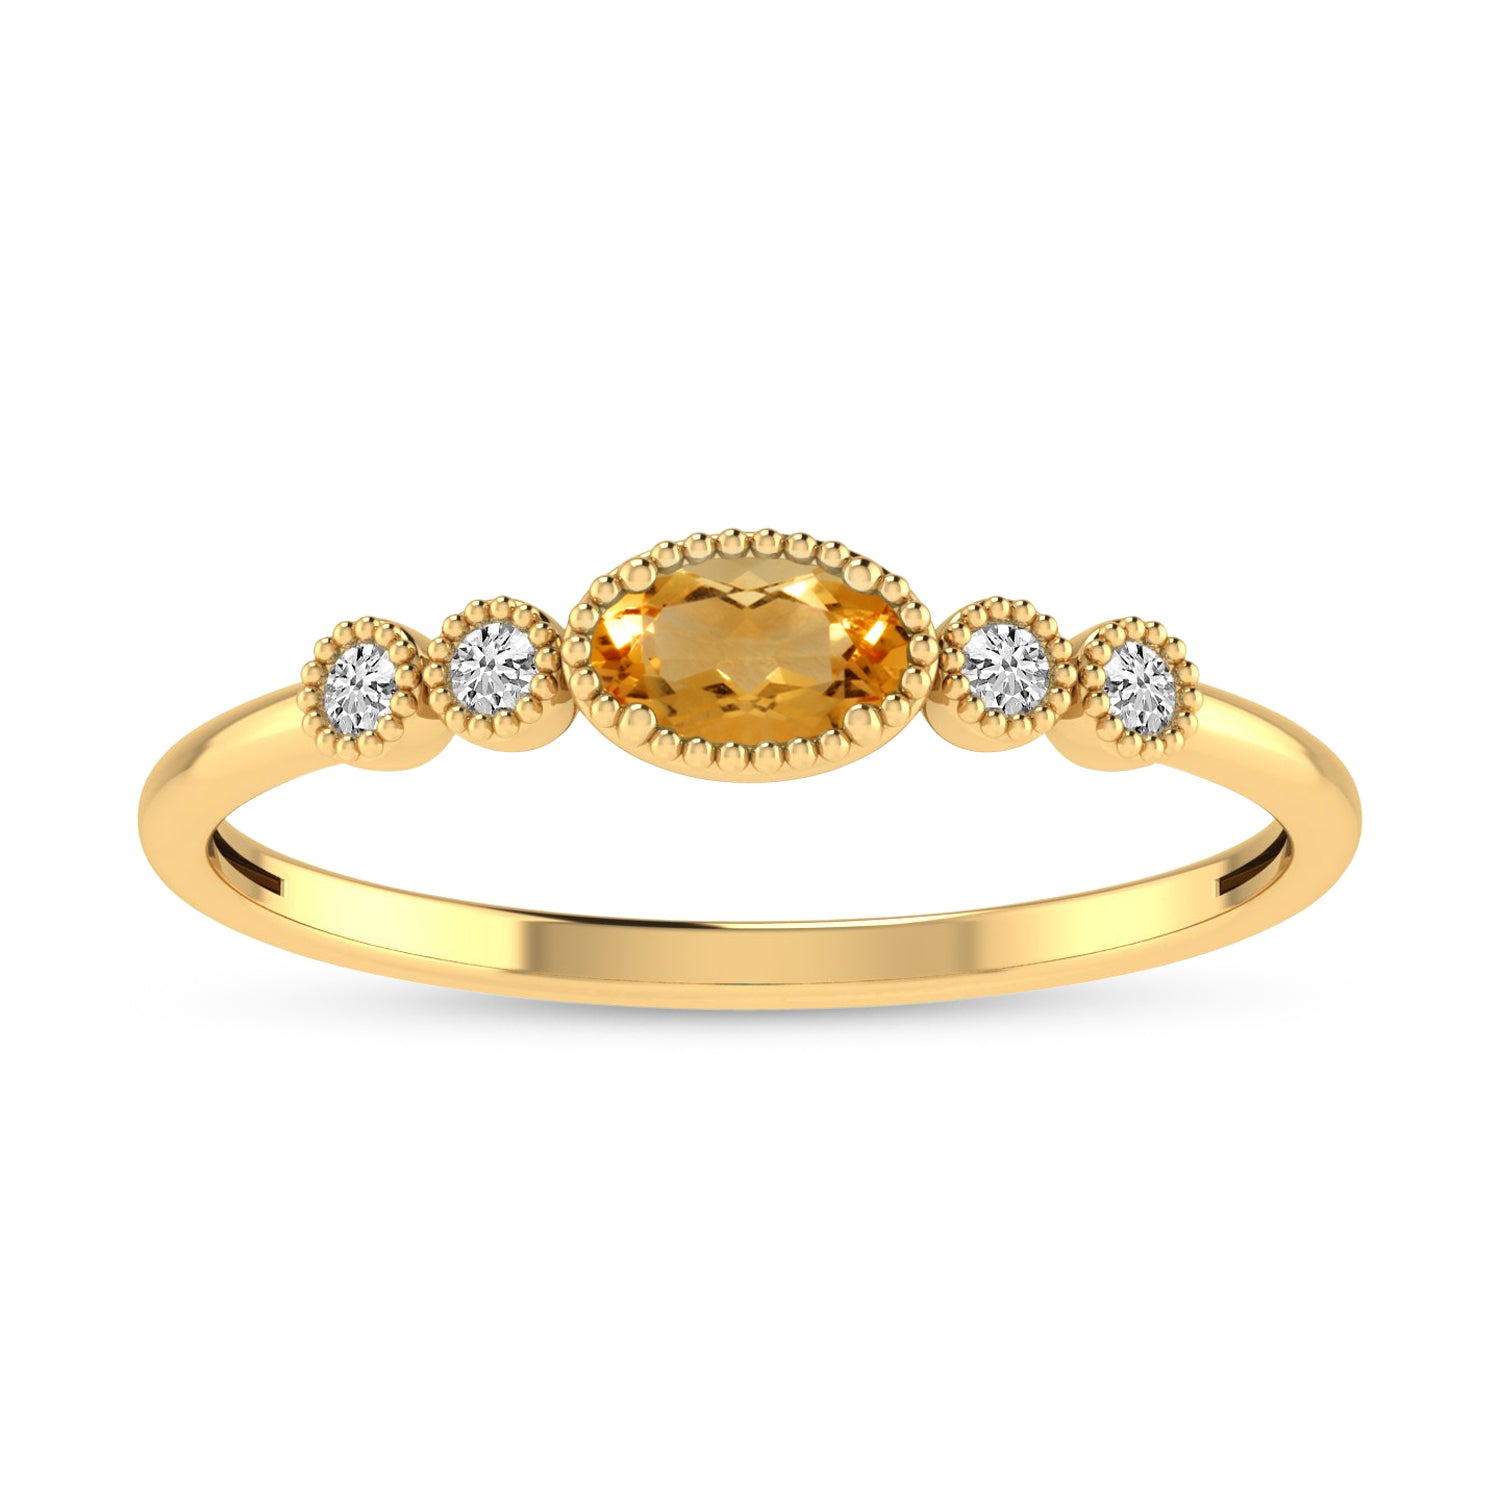 10K Yellow Gold Oval Citrine and Diamond Stackable Ring RM4307-NOV